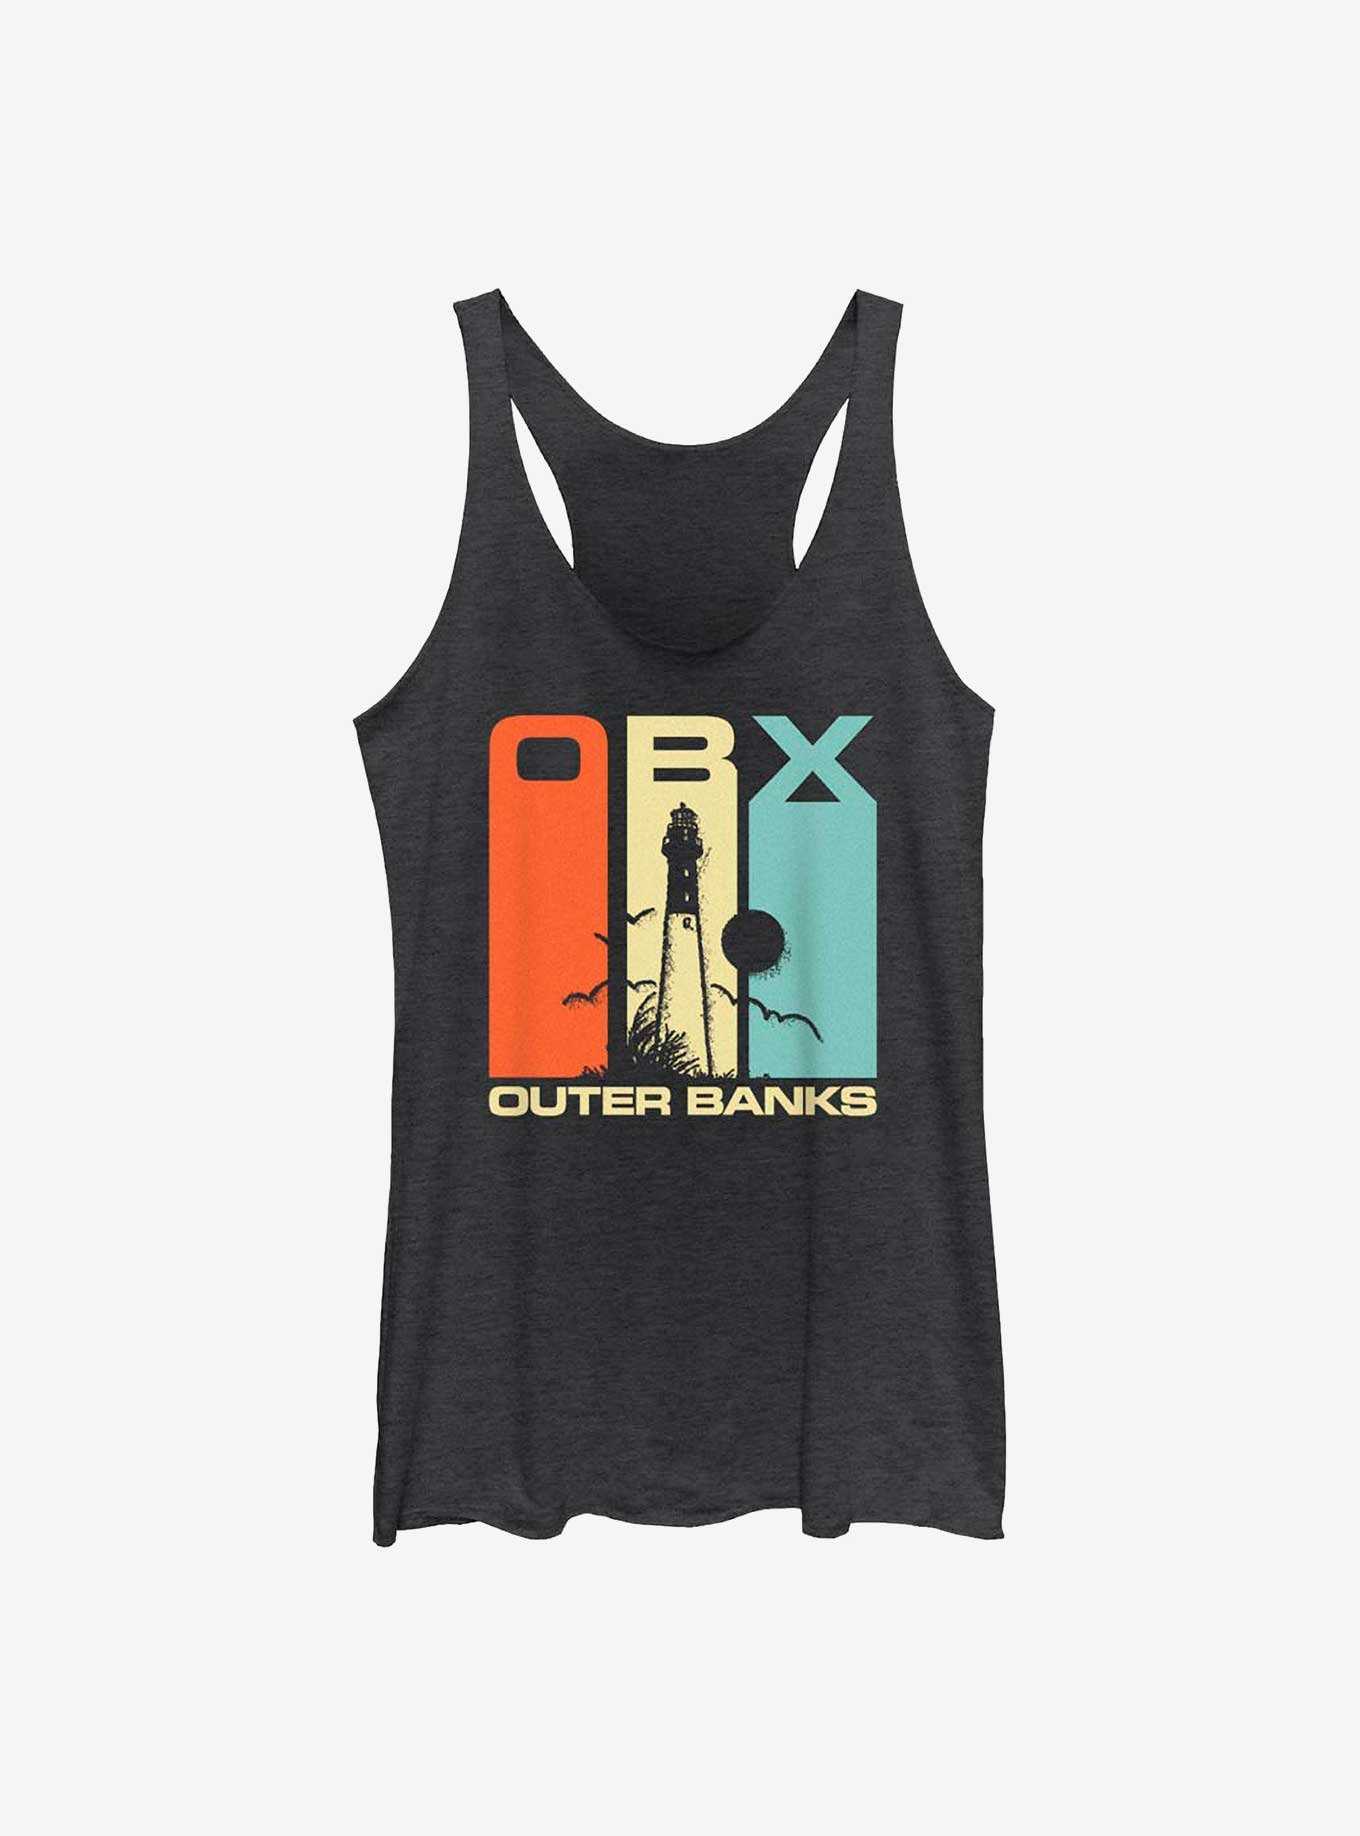 Outer Banks OBX Colors Girls Tank, , hi-res